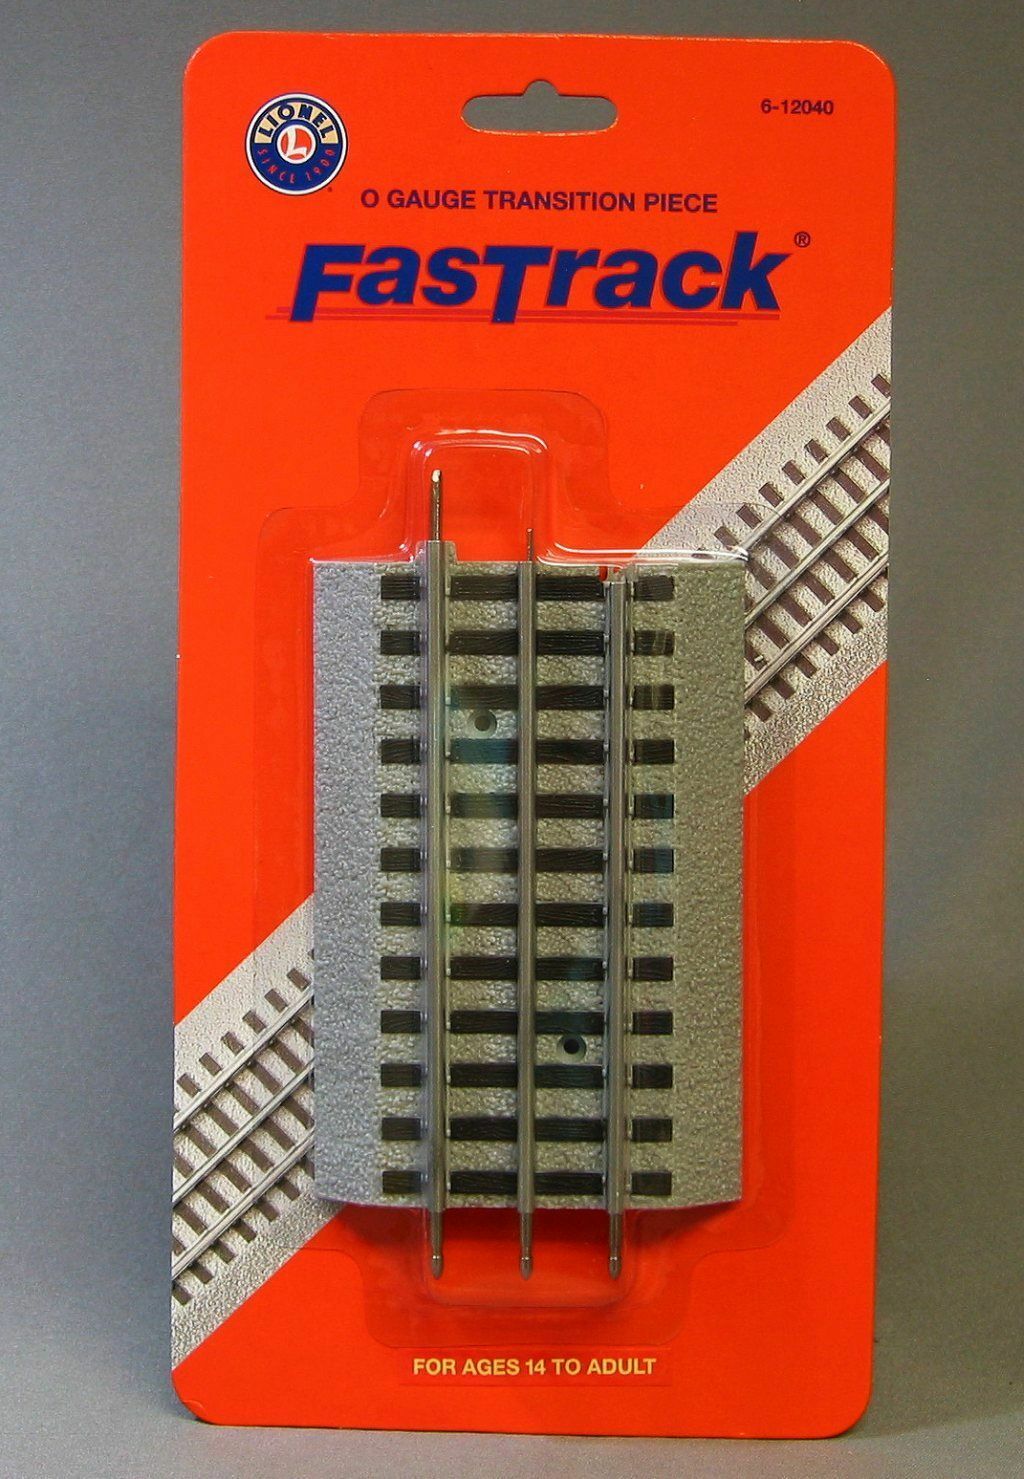 Lionel Fastrack Transition O Gauge Train Track Adapter Fast 3 Rail 6-12040 New